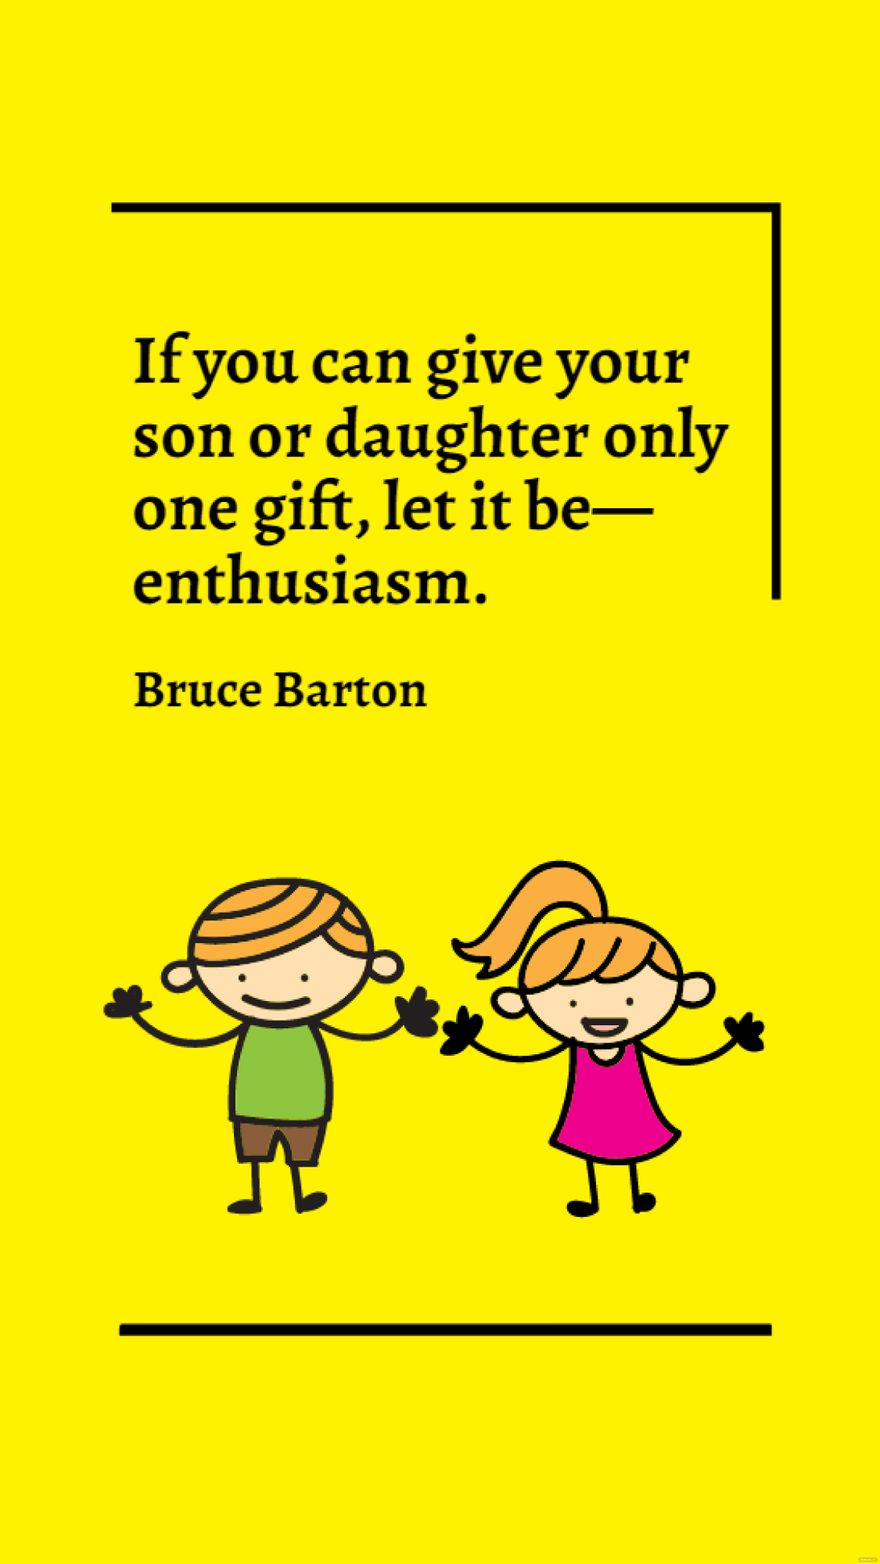 Bruce Barton - If you can give your son or daughter only one gift, let it be - enthusiasm.